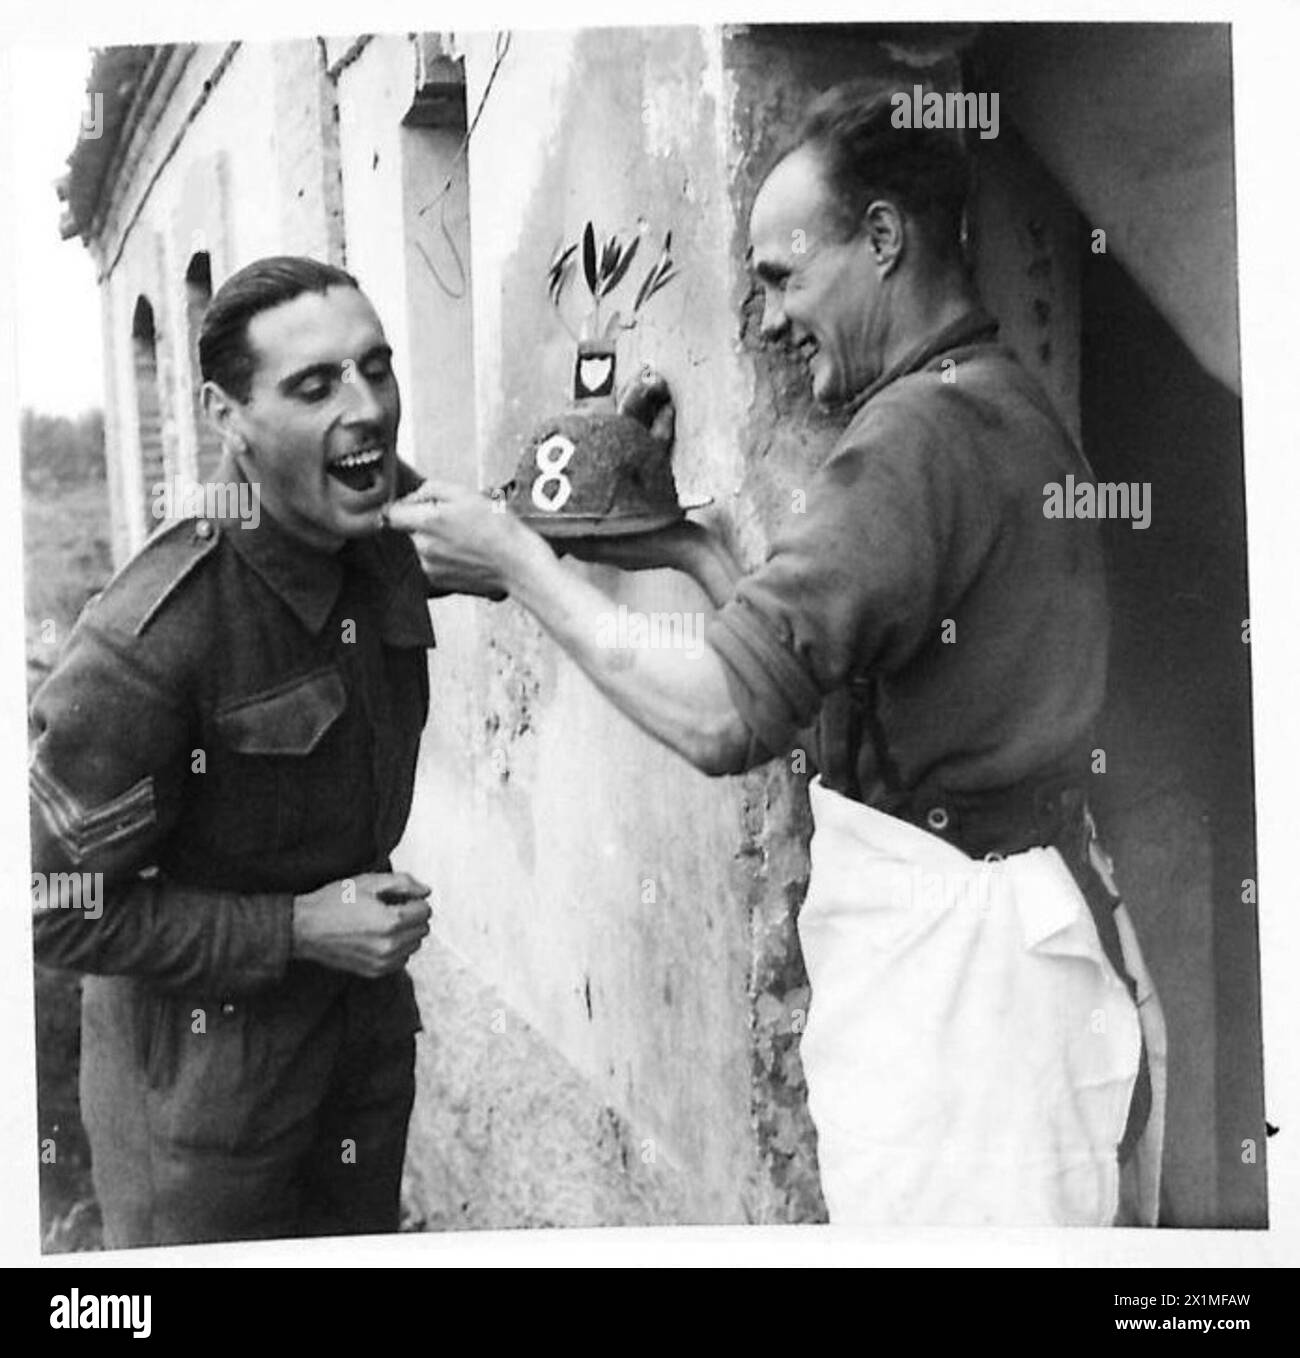 ITALY : EIGHT ARMYCHRISTMAS WITH THE TROOPS IN THE FIELD - Dvr. J.E. Insley of 2 Ducie Street, Clapham, London, gives Sgt. John Rooke, Royal Signals, of 295 Brompton Road, London, a taste of the sample Christmas fare, British Army Stock Photo